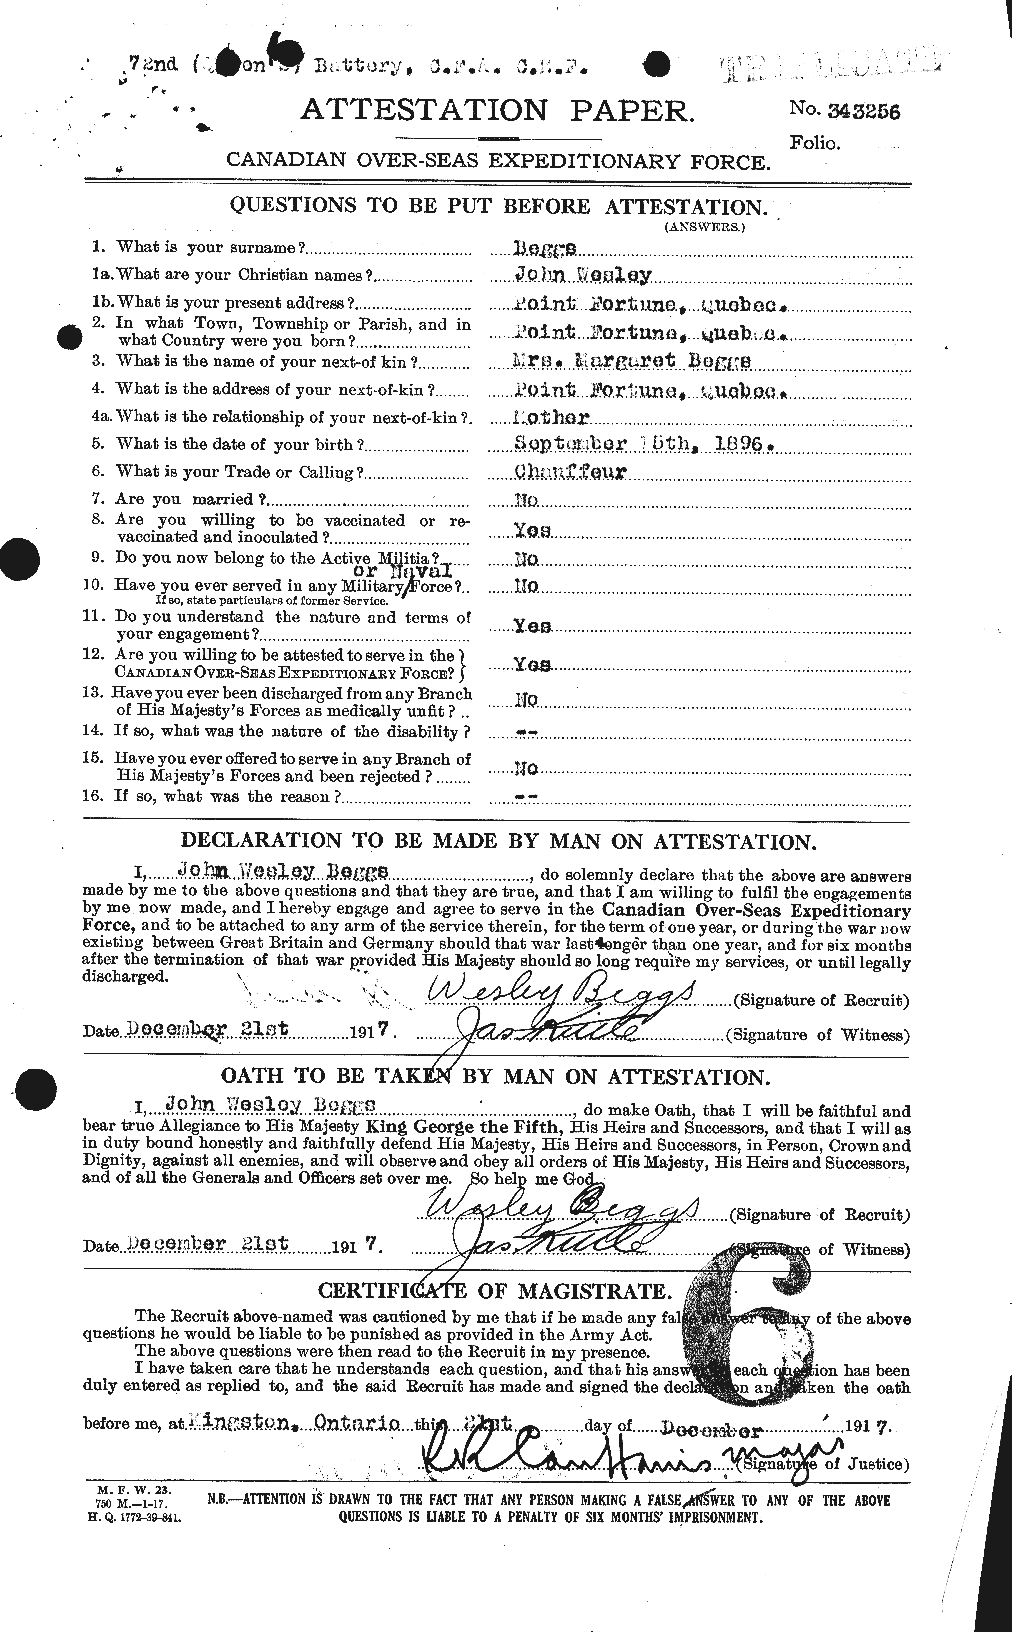 Personnel Records of the First World War - CEF 232380a